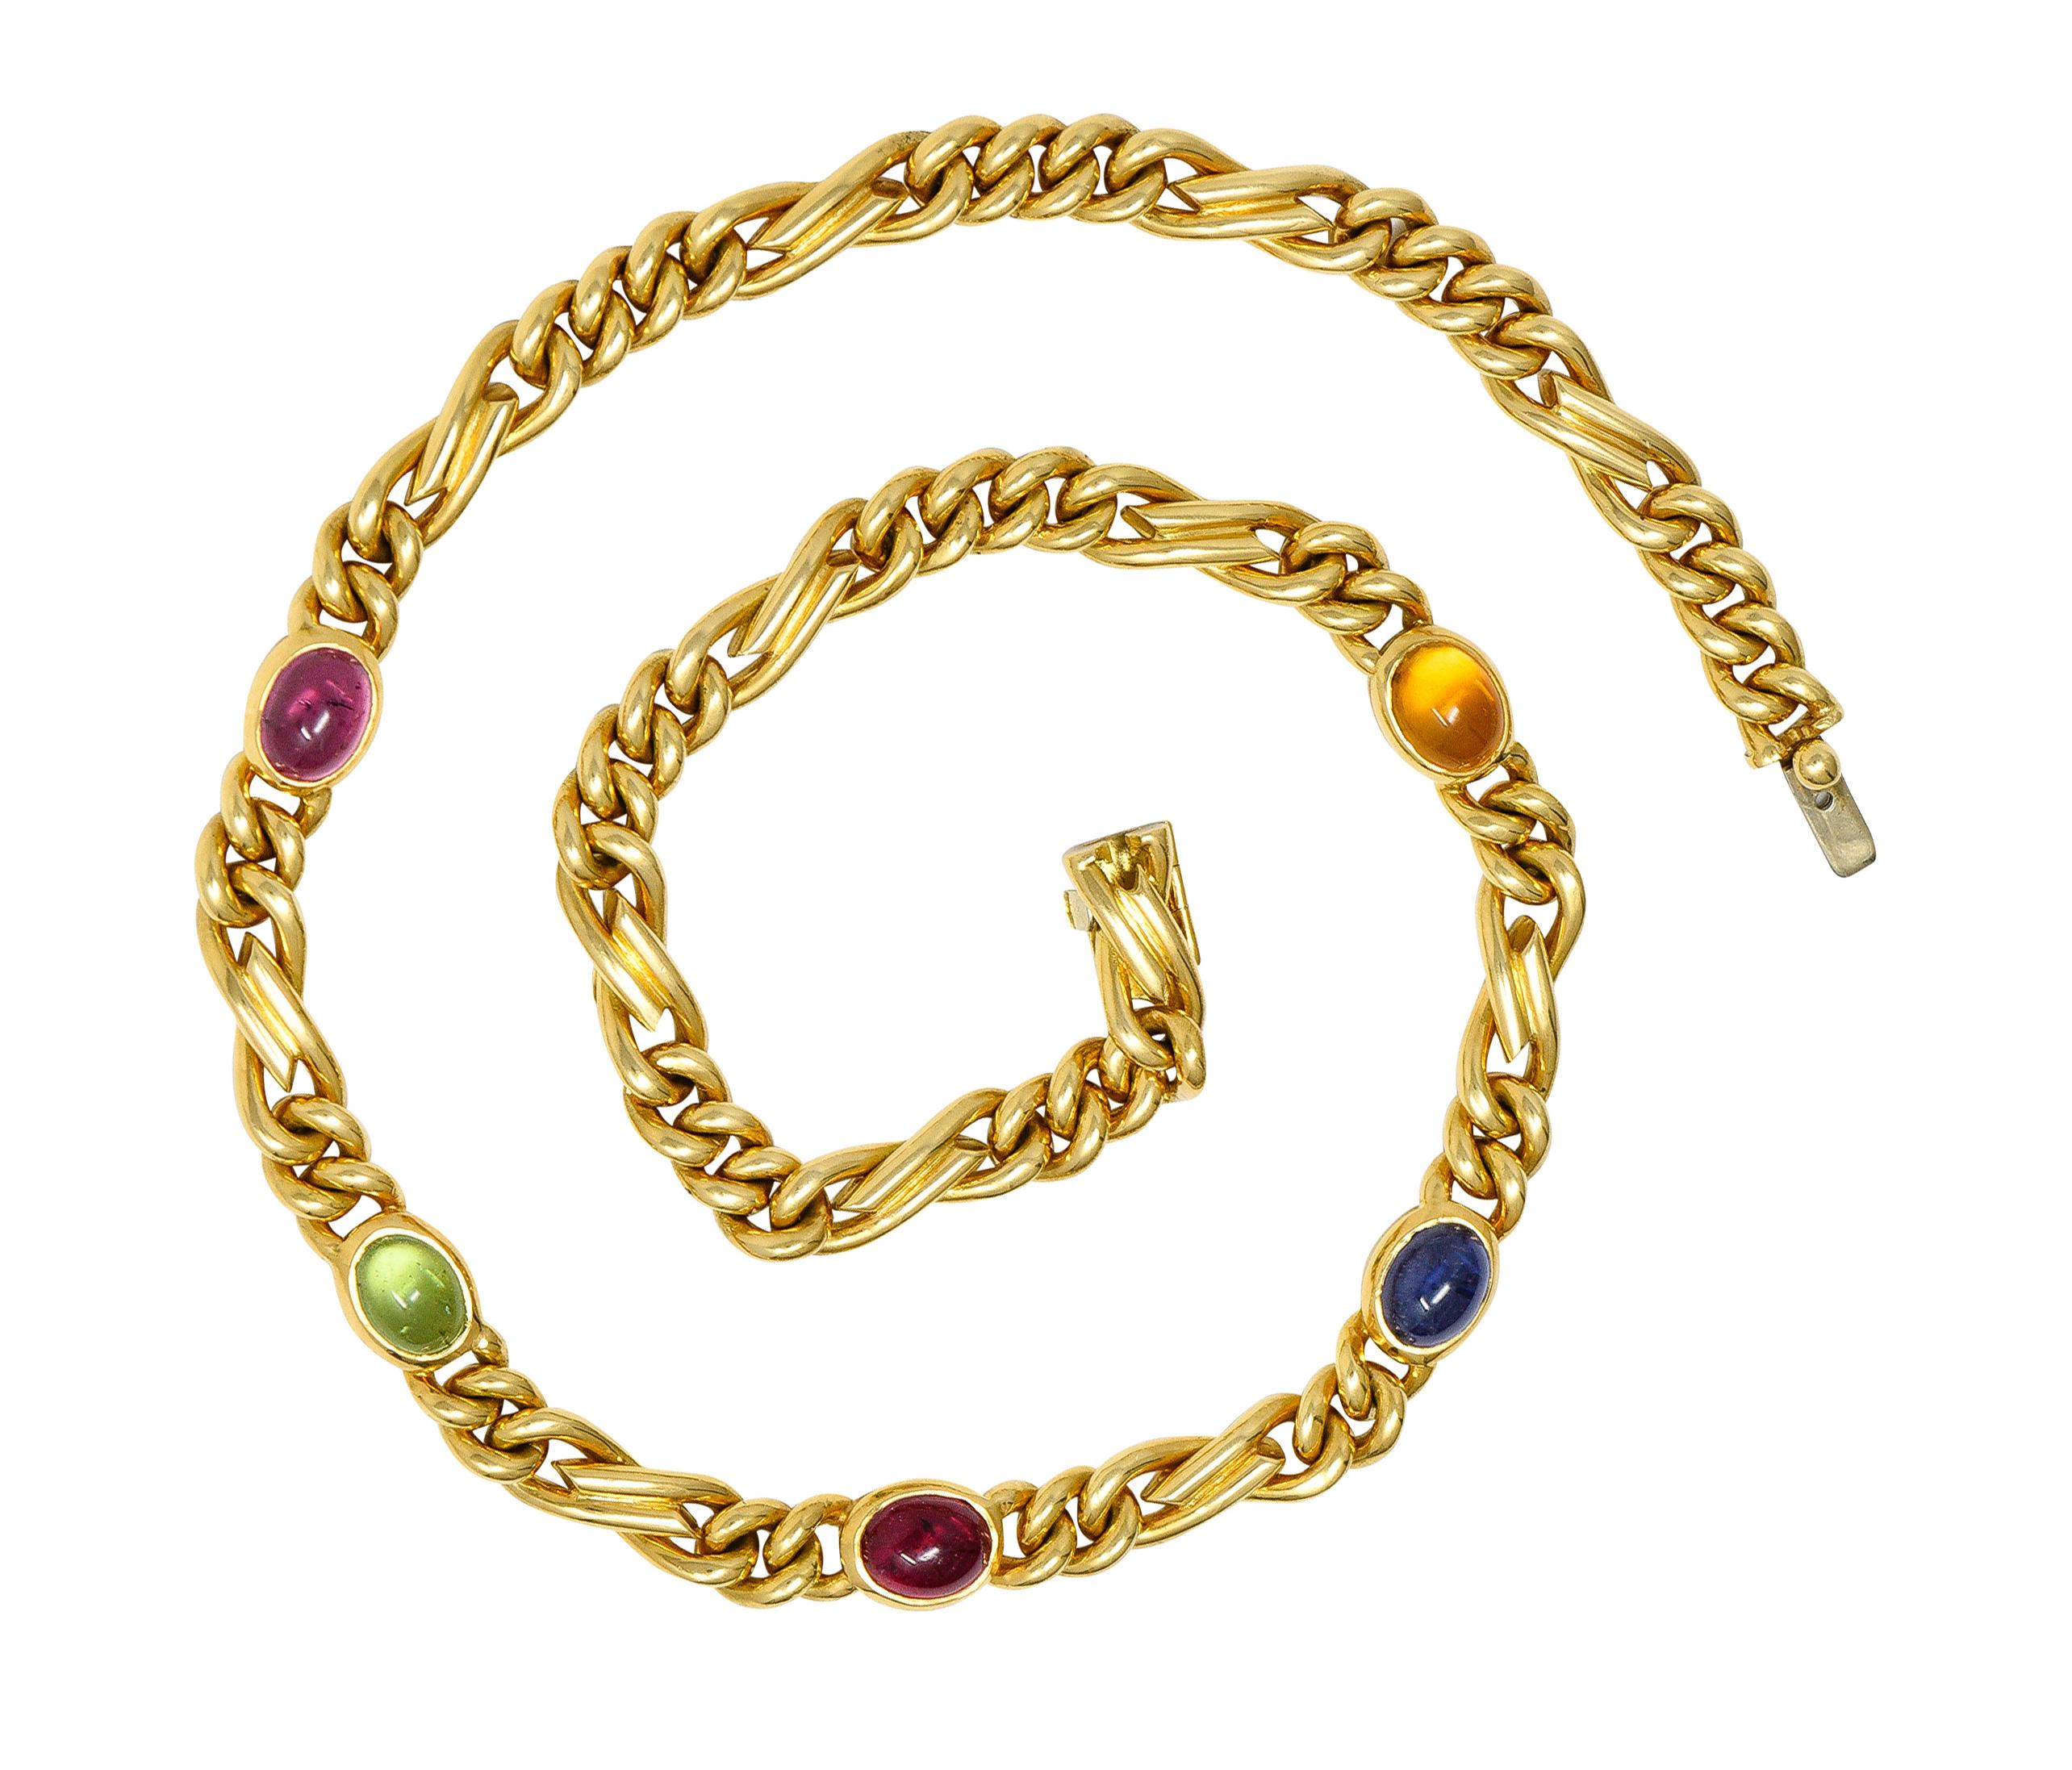 Designed as a figaro style link chain with oval shaped multi-gem cabochons measuring 6.0 x 8.0 mm. Consisting of pink tourmaline, green tourmaline, sapphire, and citrine - bezel set. Transparent medium pink, light green, medium blue, and light